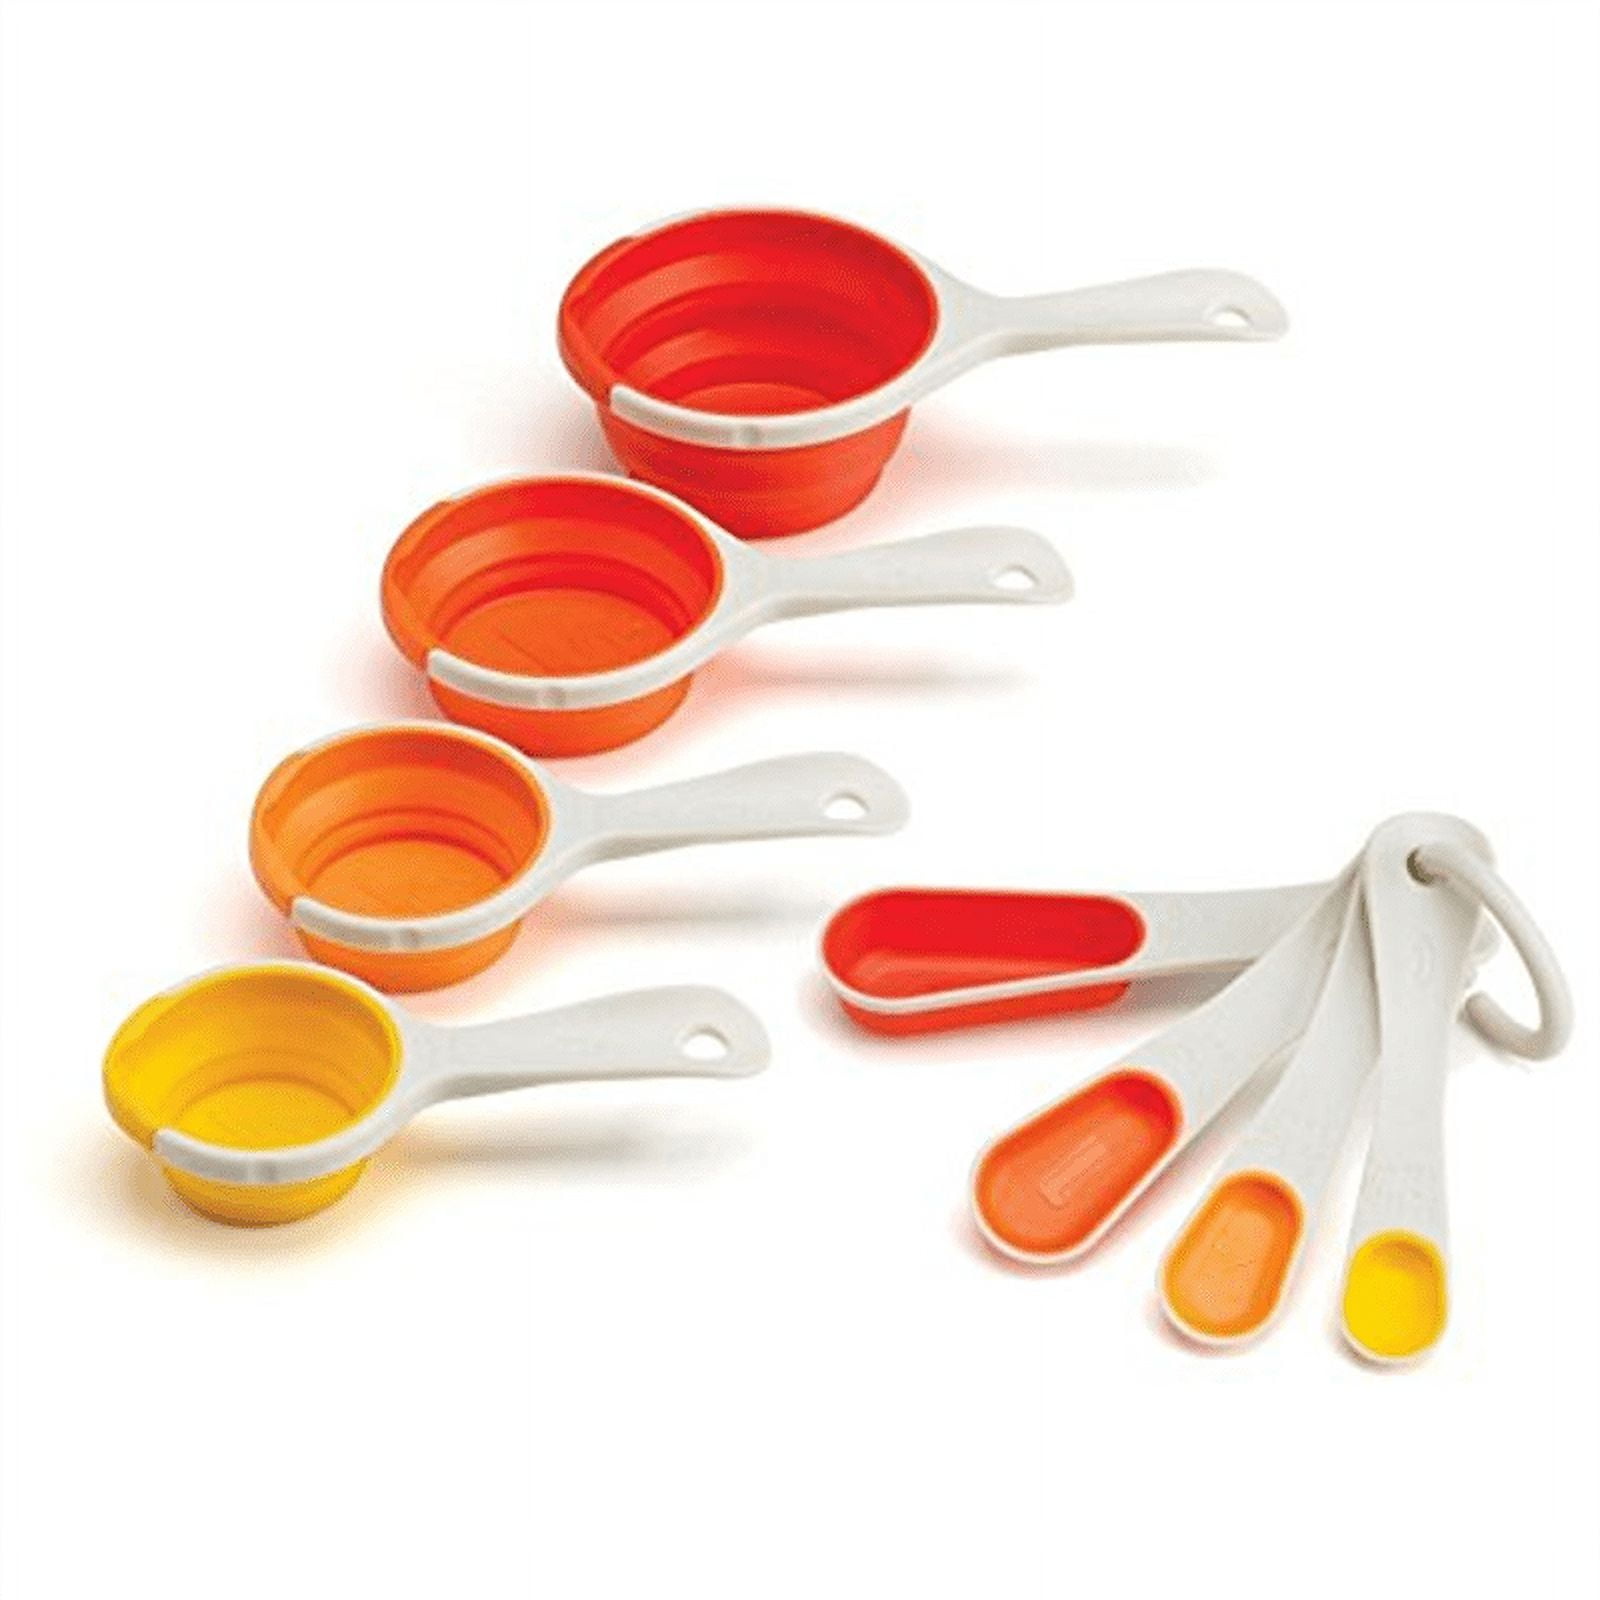 SleekStor Set of 4 Silicone Collapsible Measuring Cups 